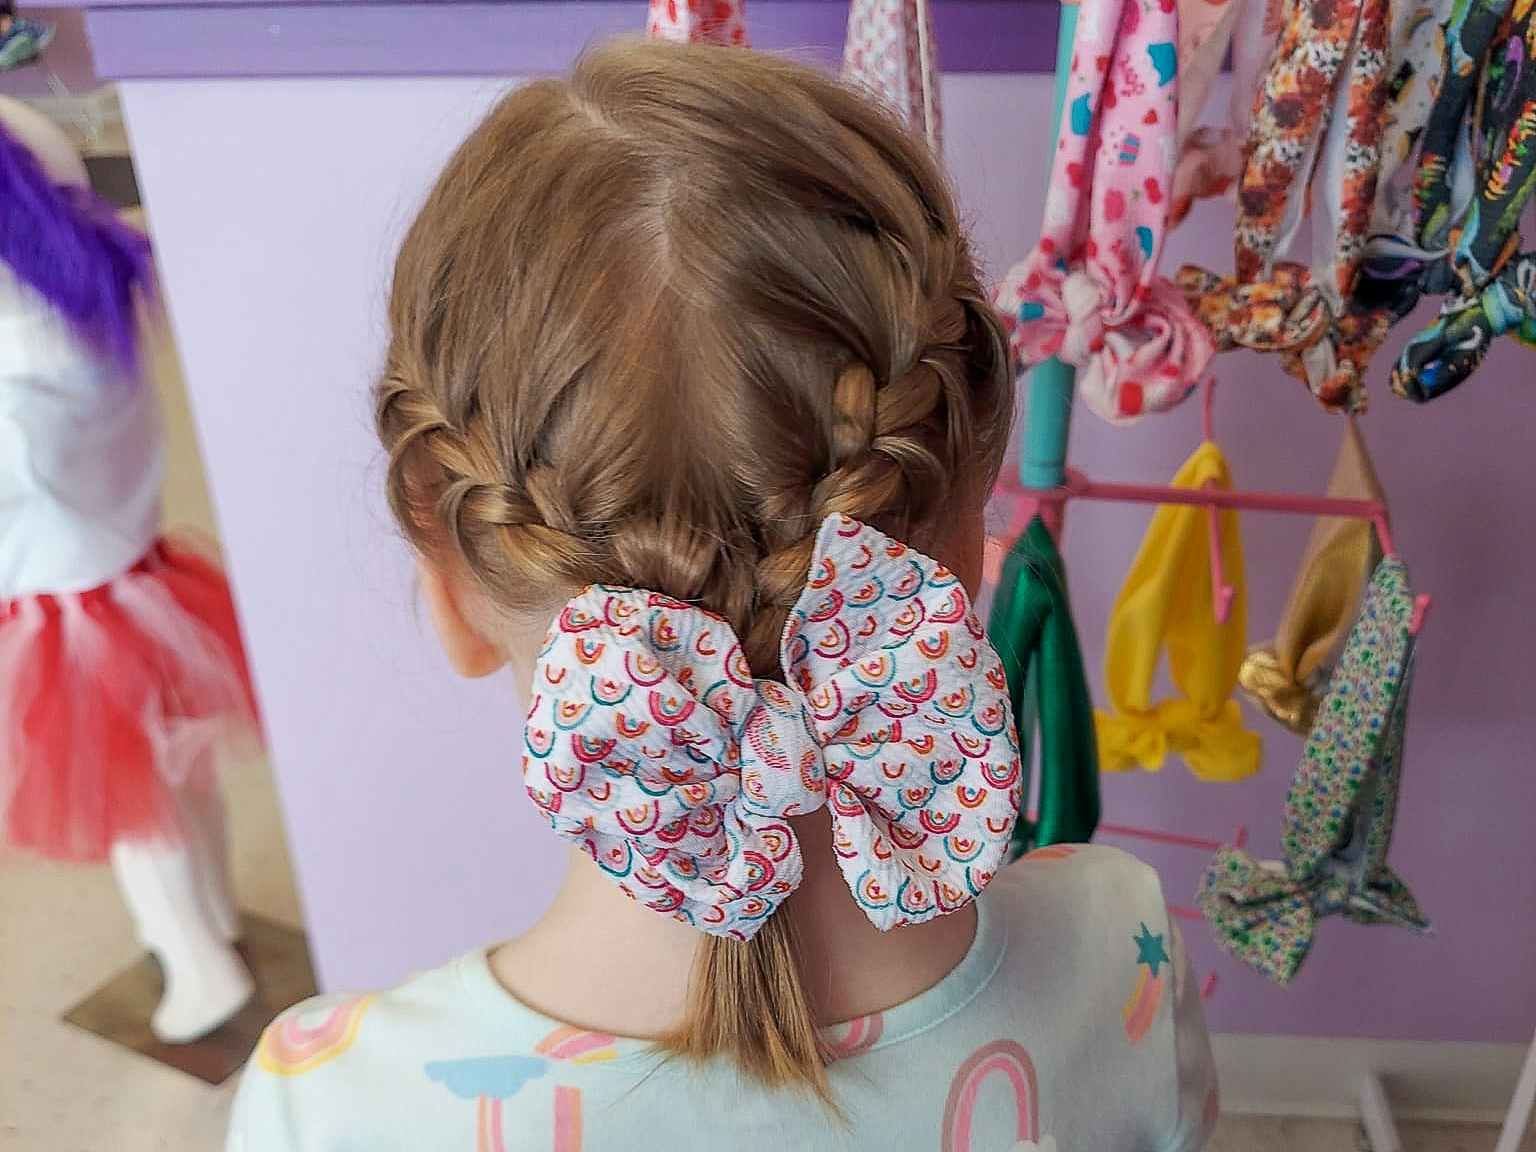 A young girl with two french braids joined into a poytail with a bow